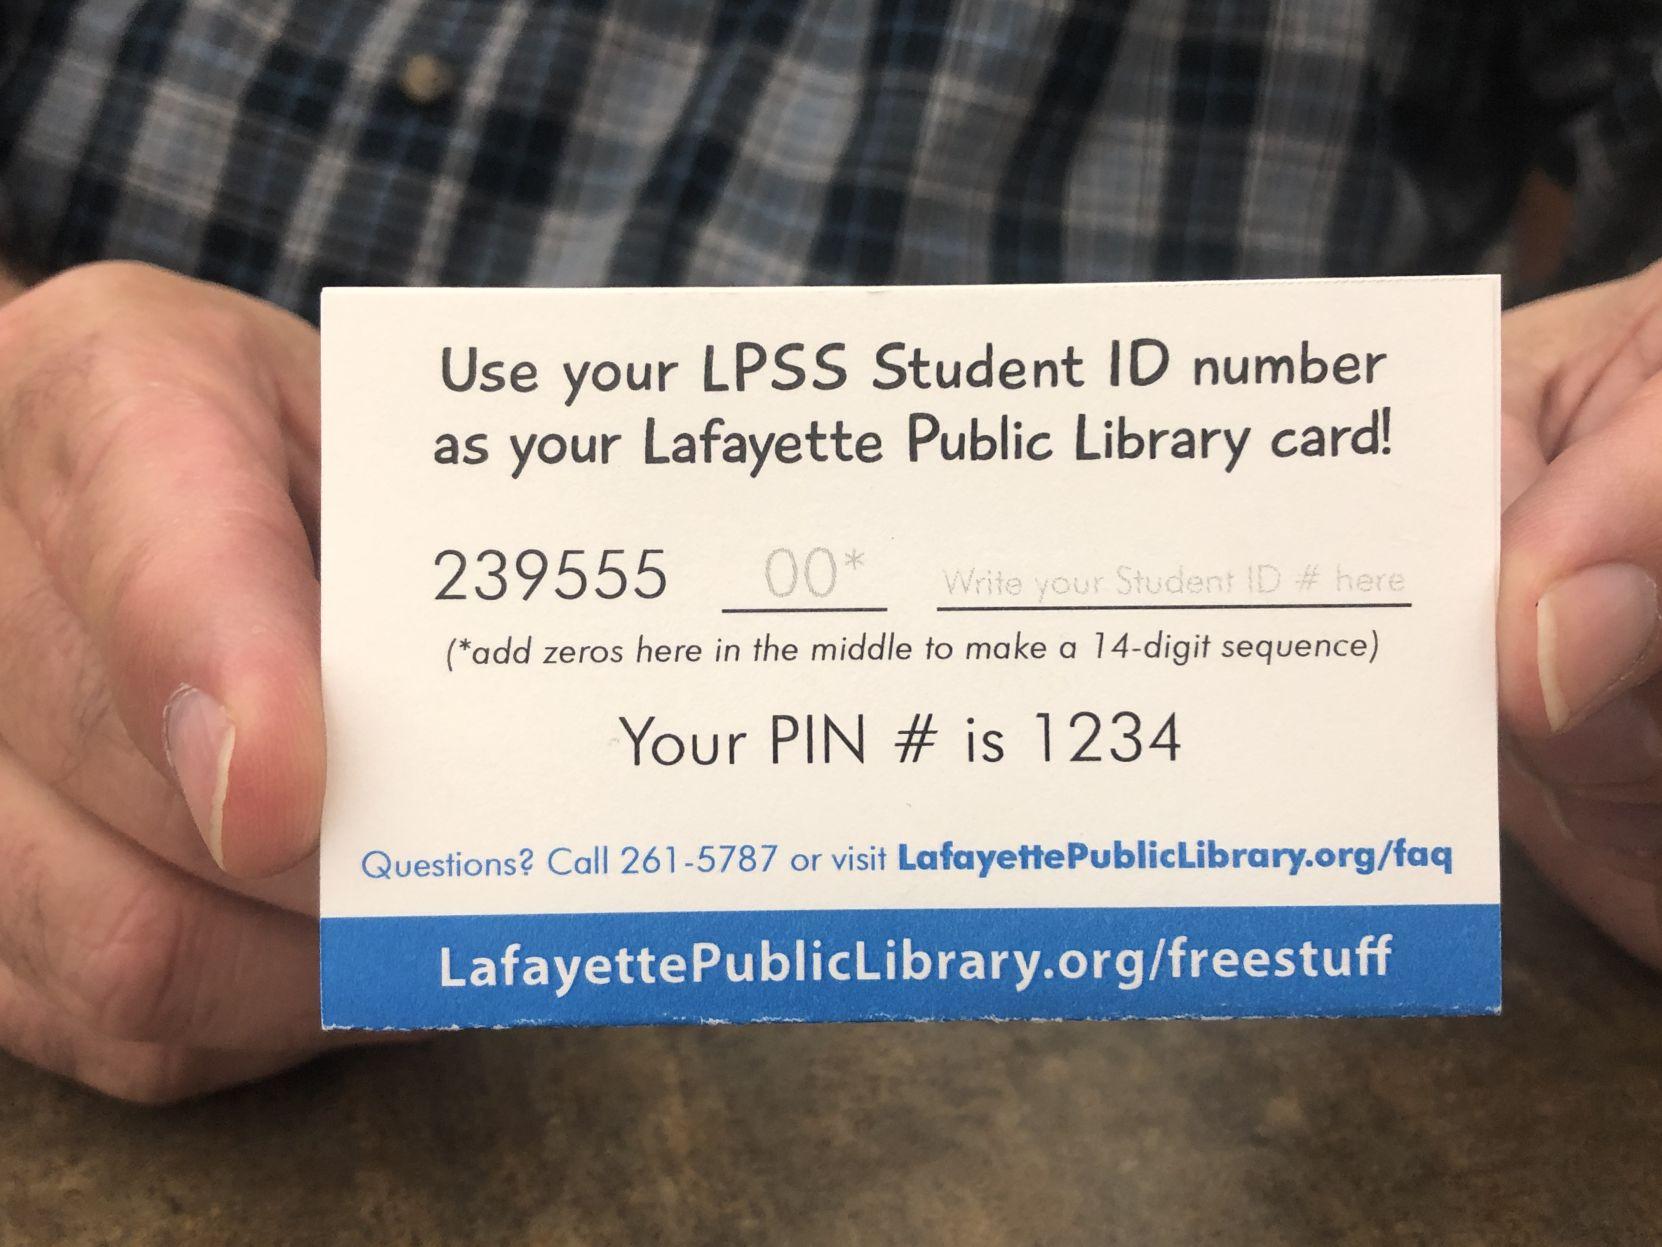 Check it out: Lafayette students get virtual library cards for